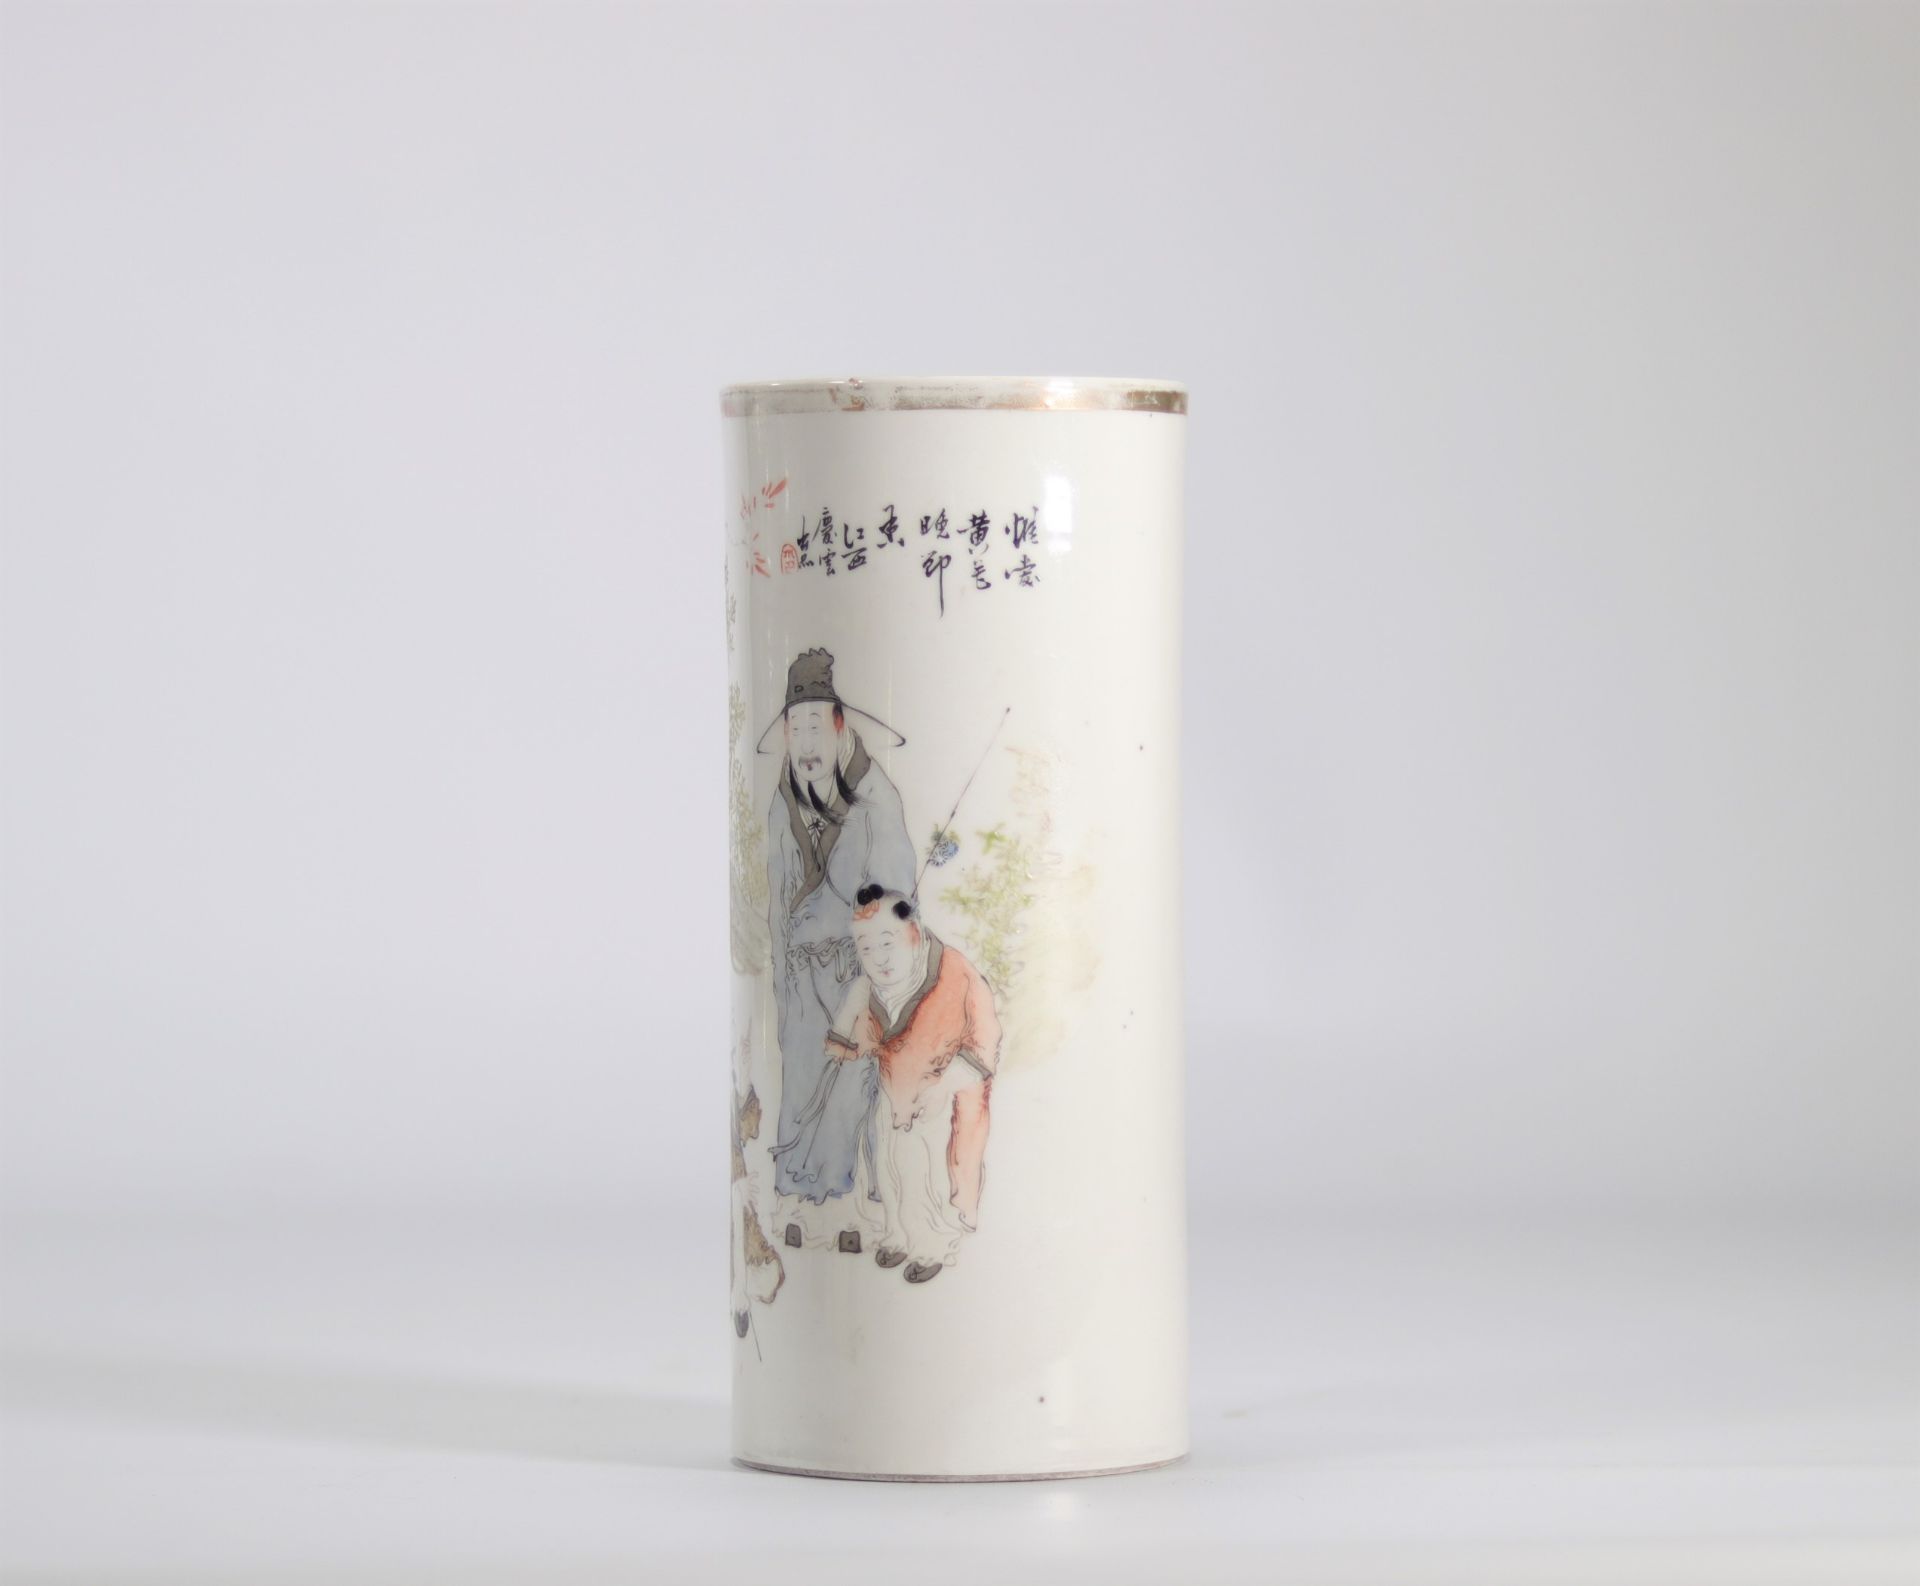 Qianjiang cai porcelain brush holder decorated with characters - Image 3 of 5